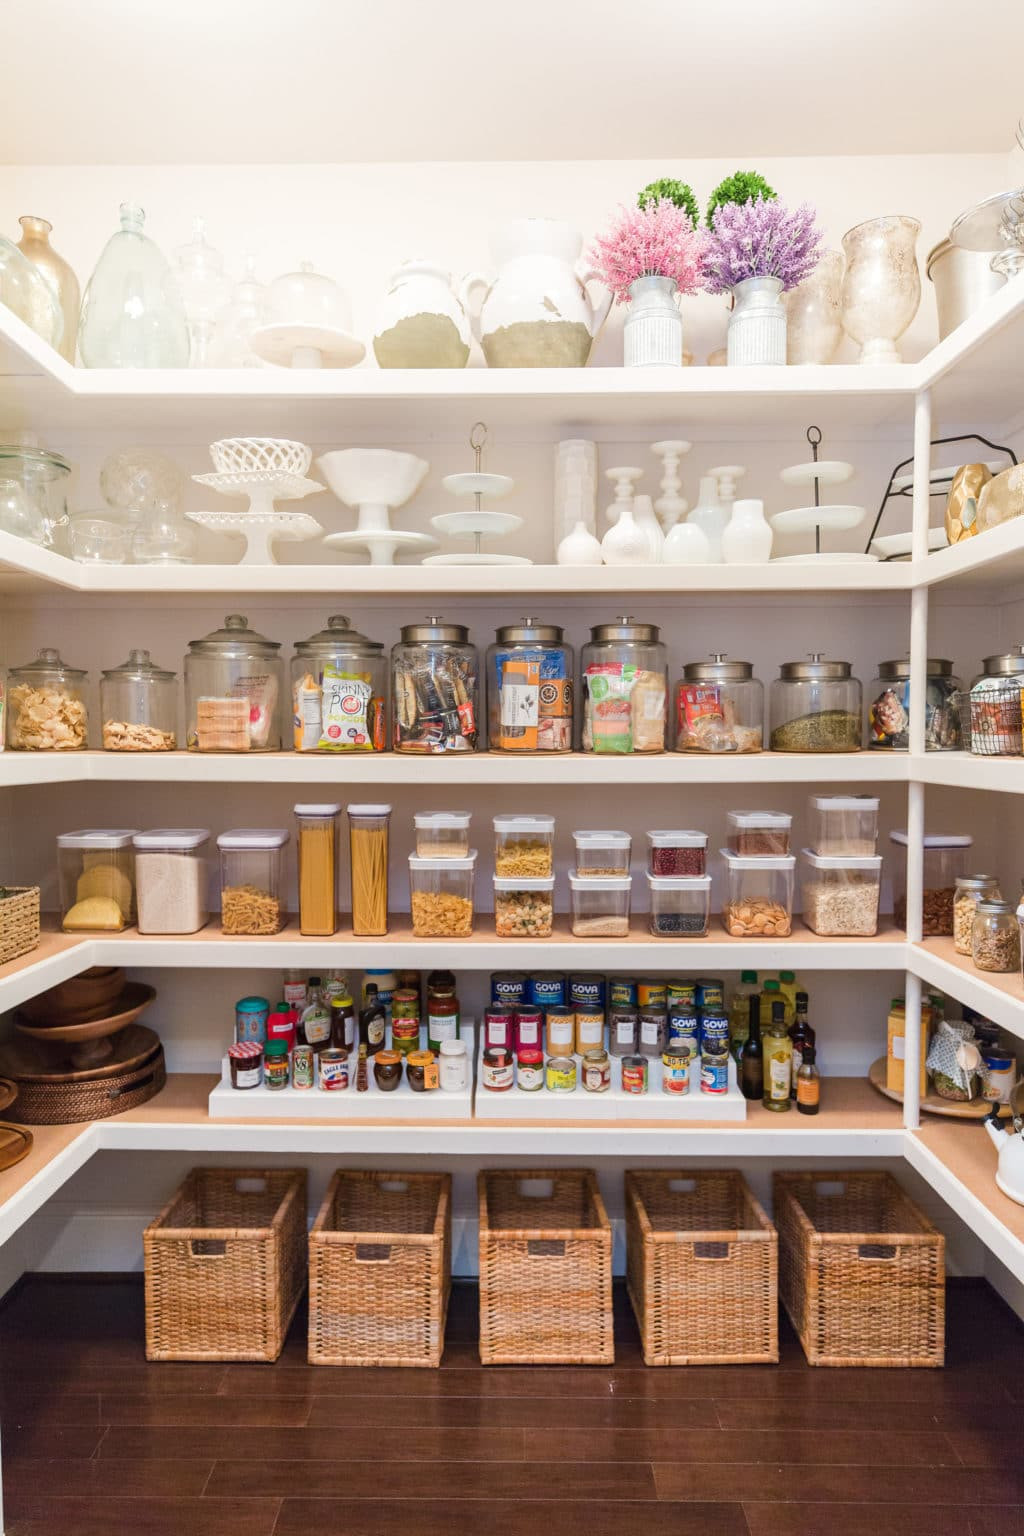 Kitchen Pantry Organizing Ideas
 10 Clever Ways to Keep an Organized Pantry